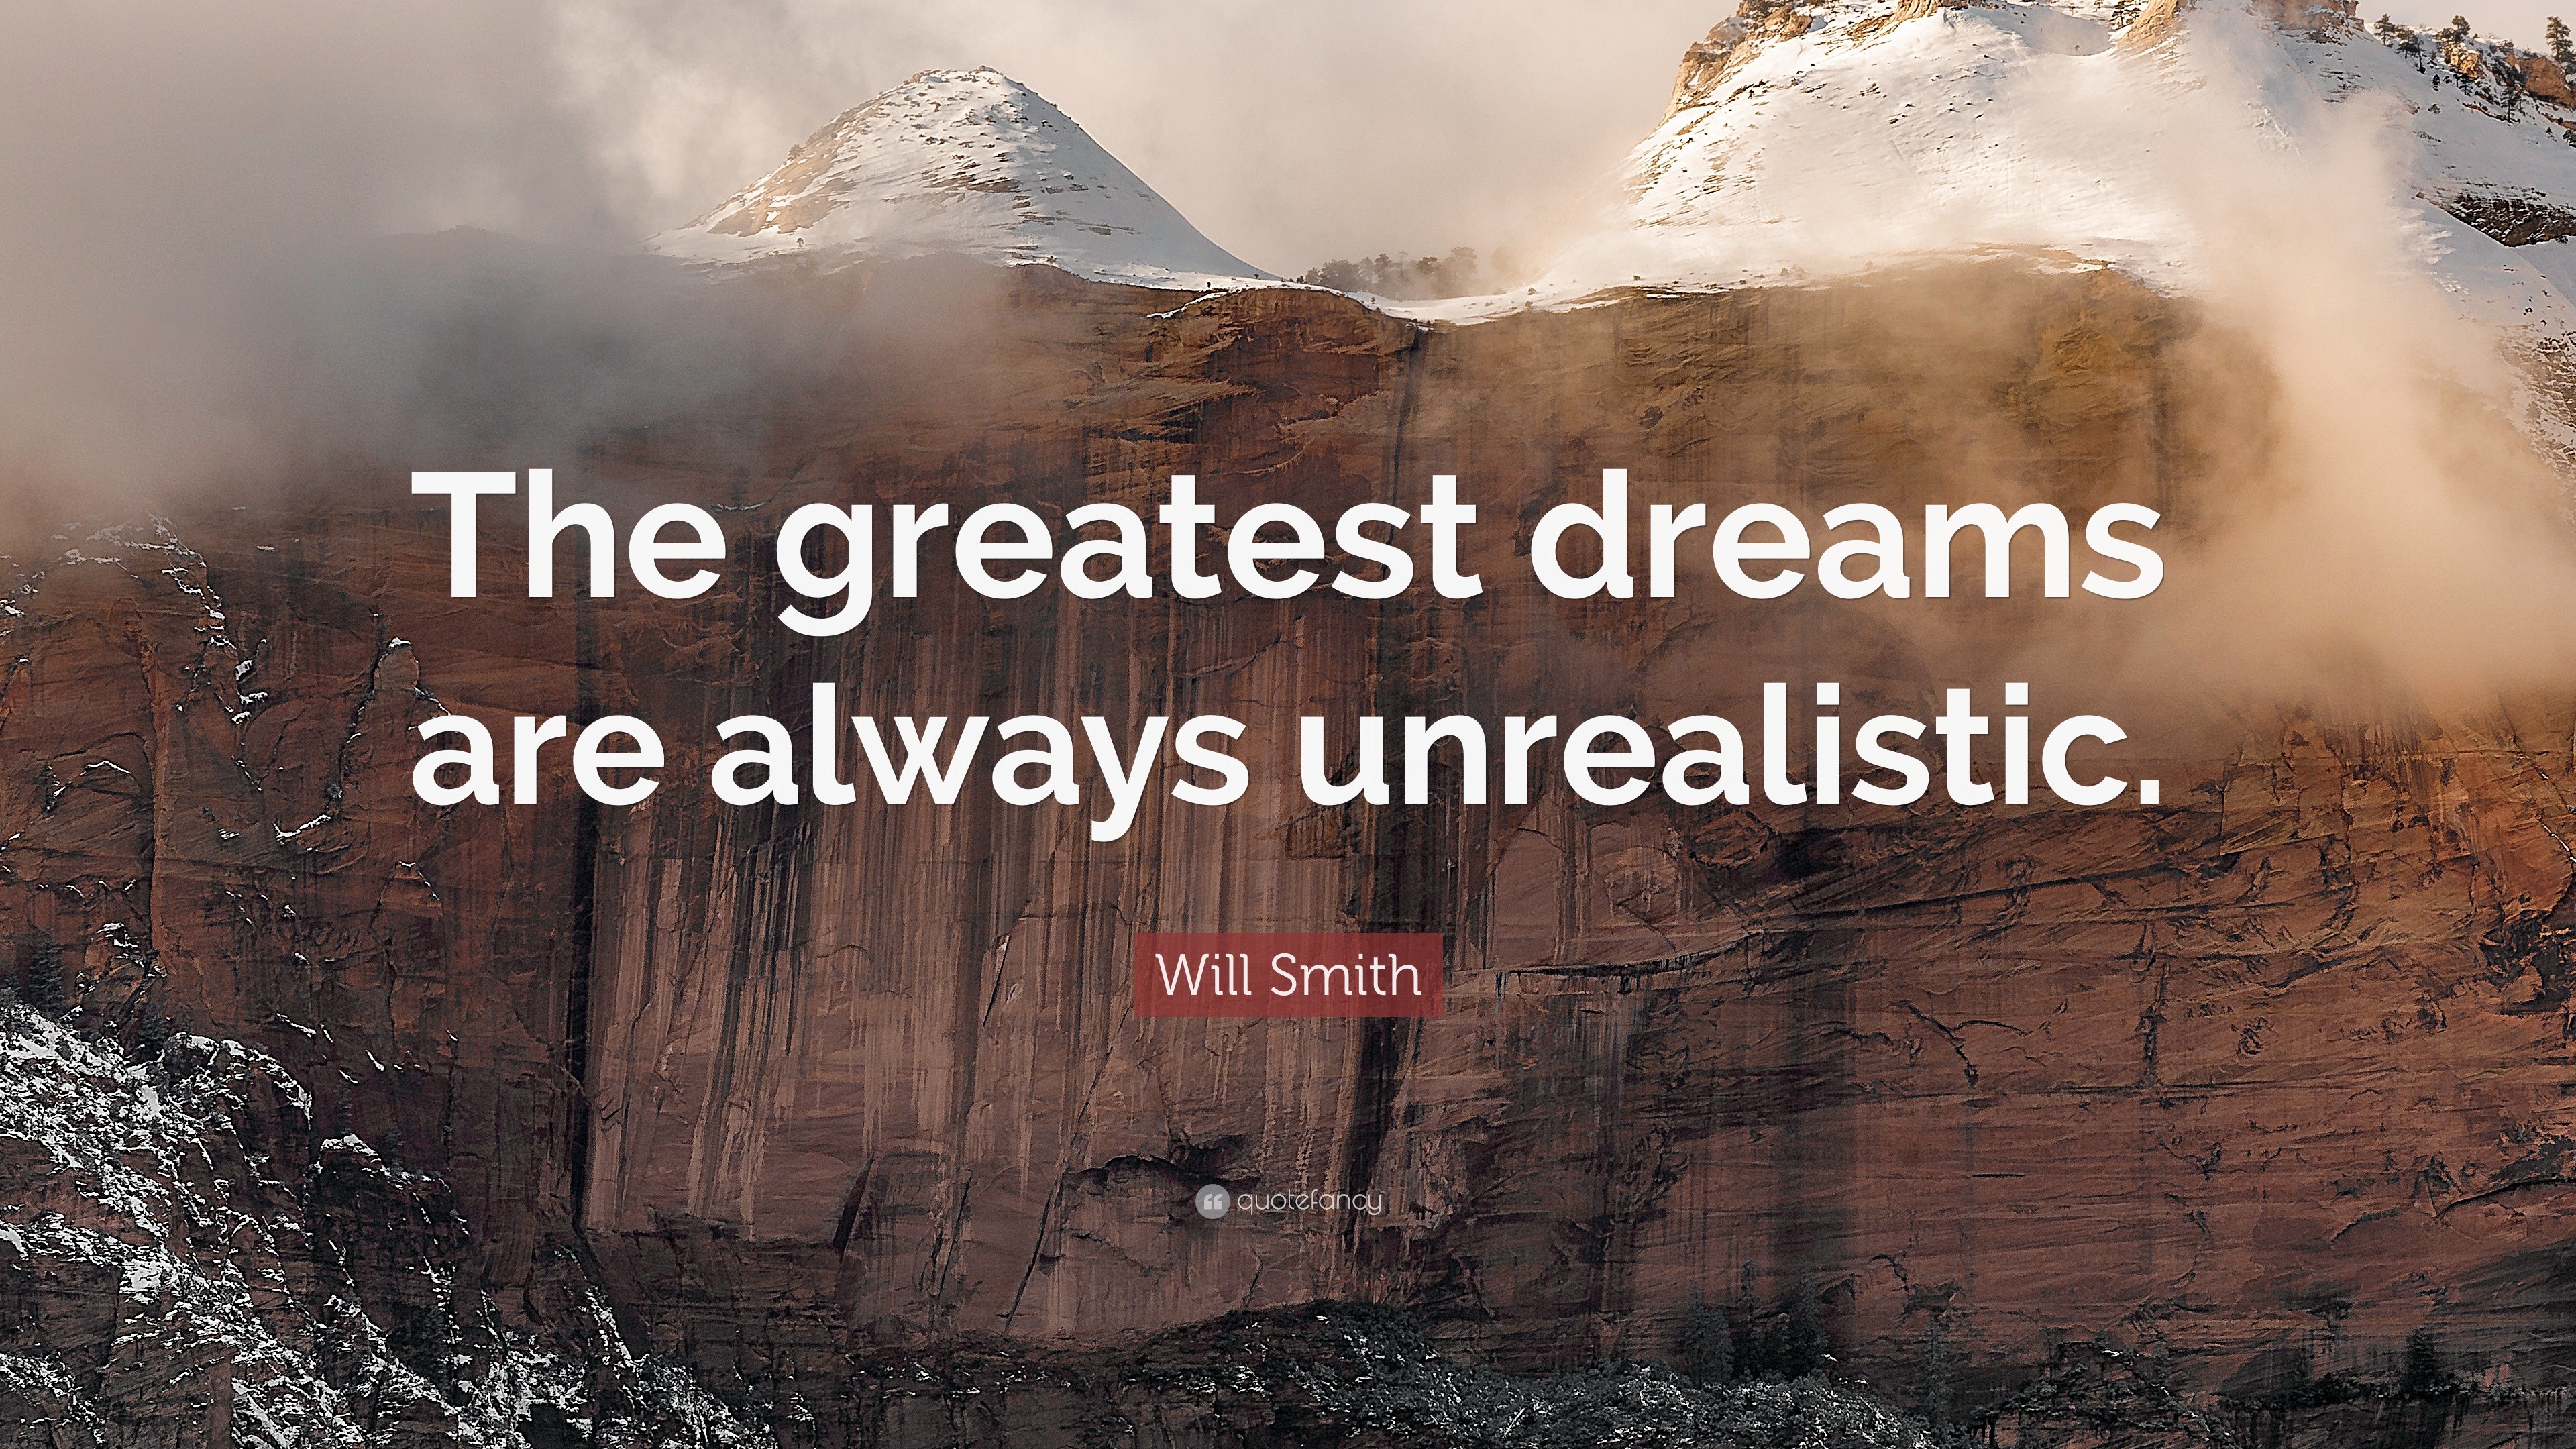 Will Smith Quote “The greatest dreams are always unrealistic ”